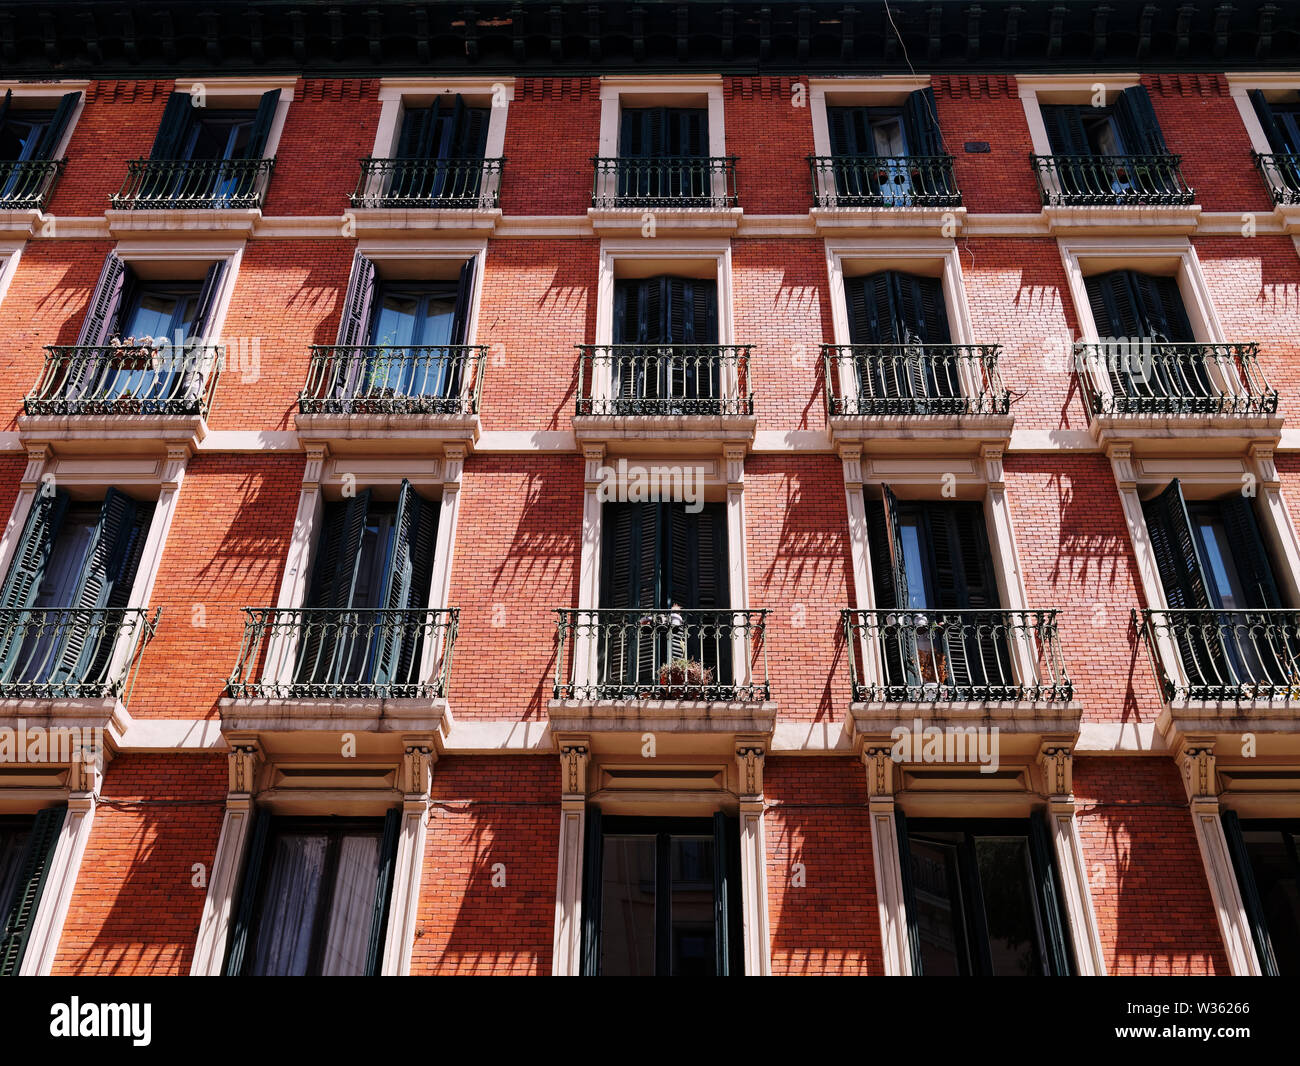 Facade of an apartment building with windows and balconies Stock Photo